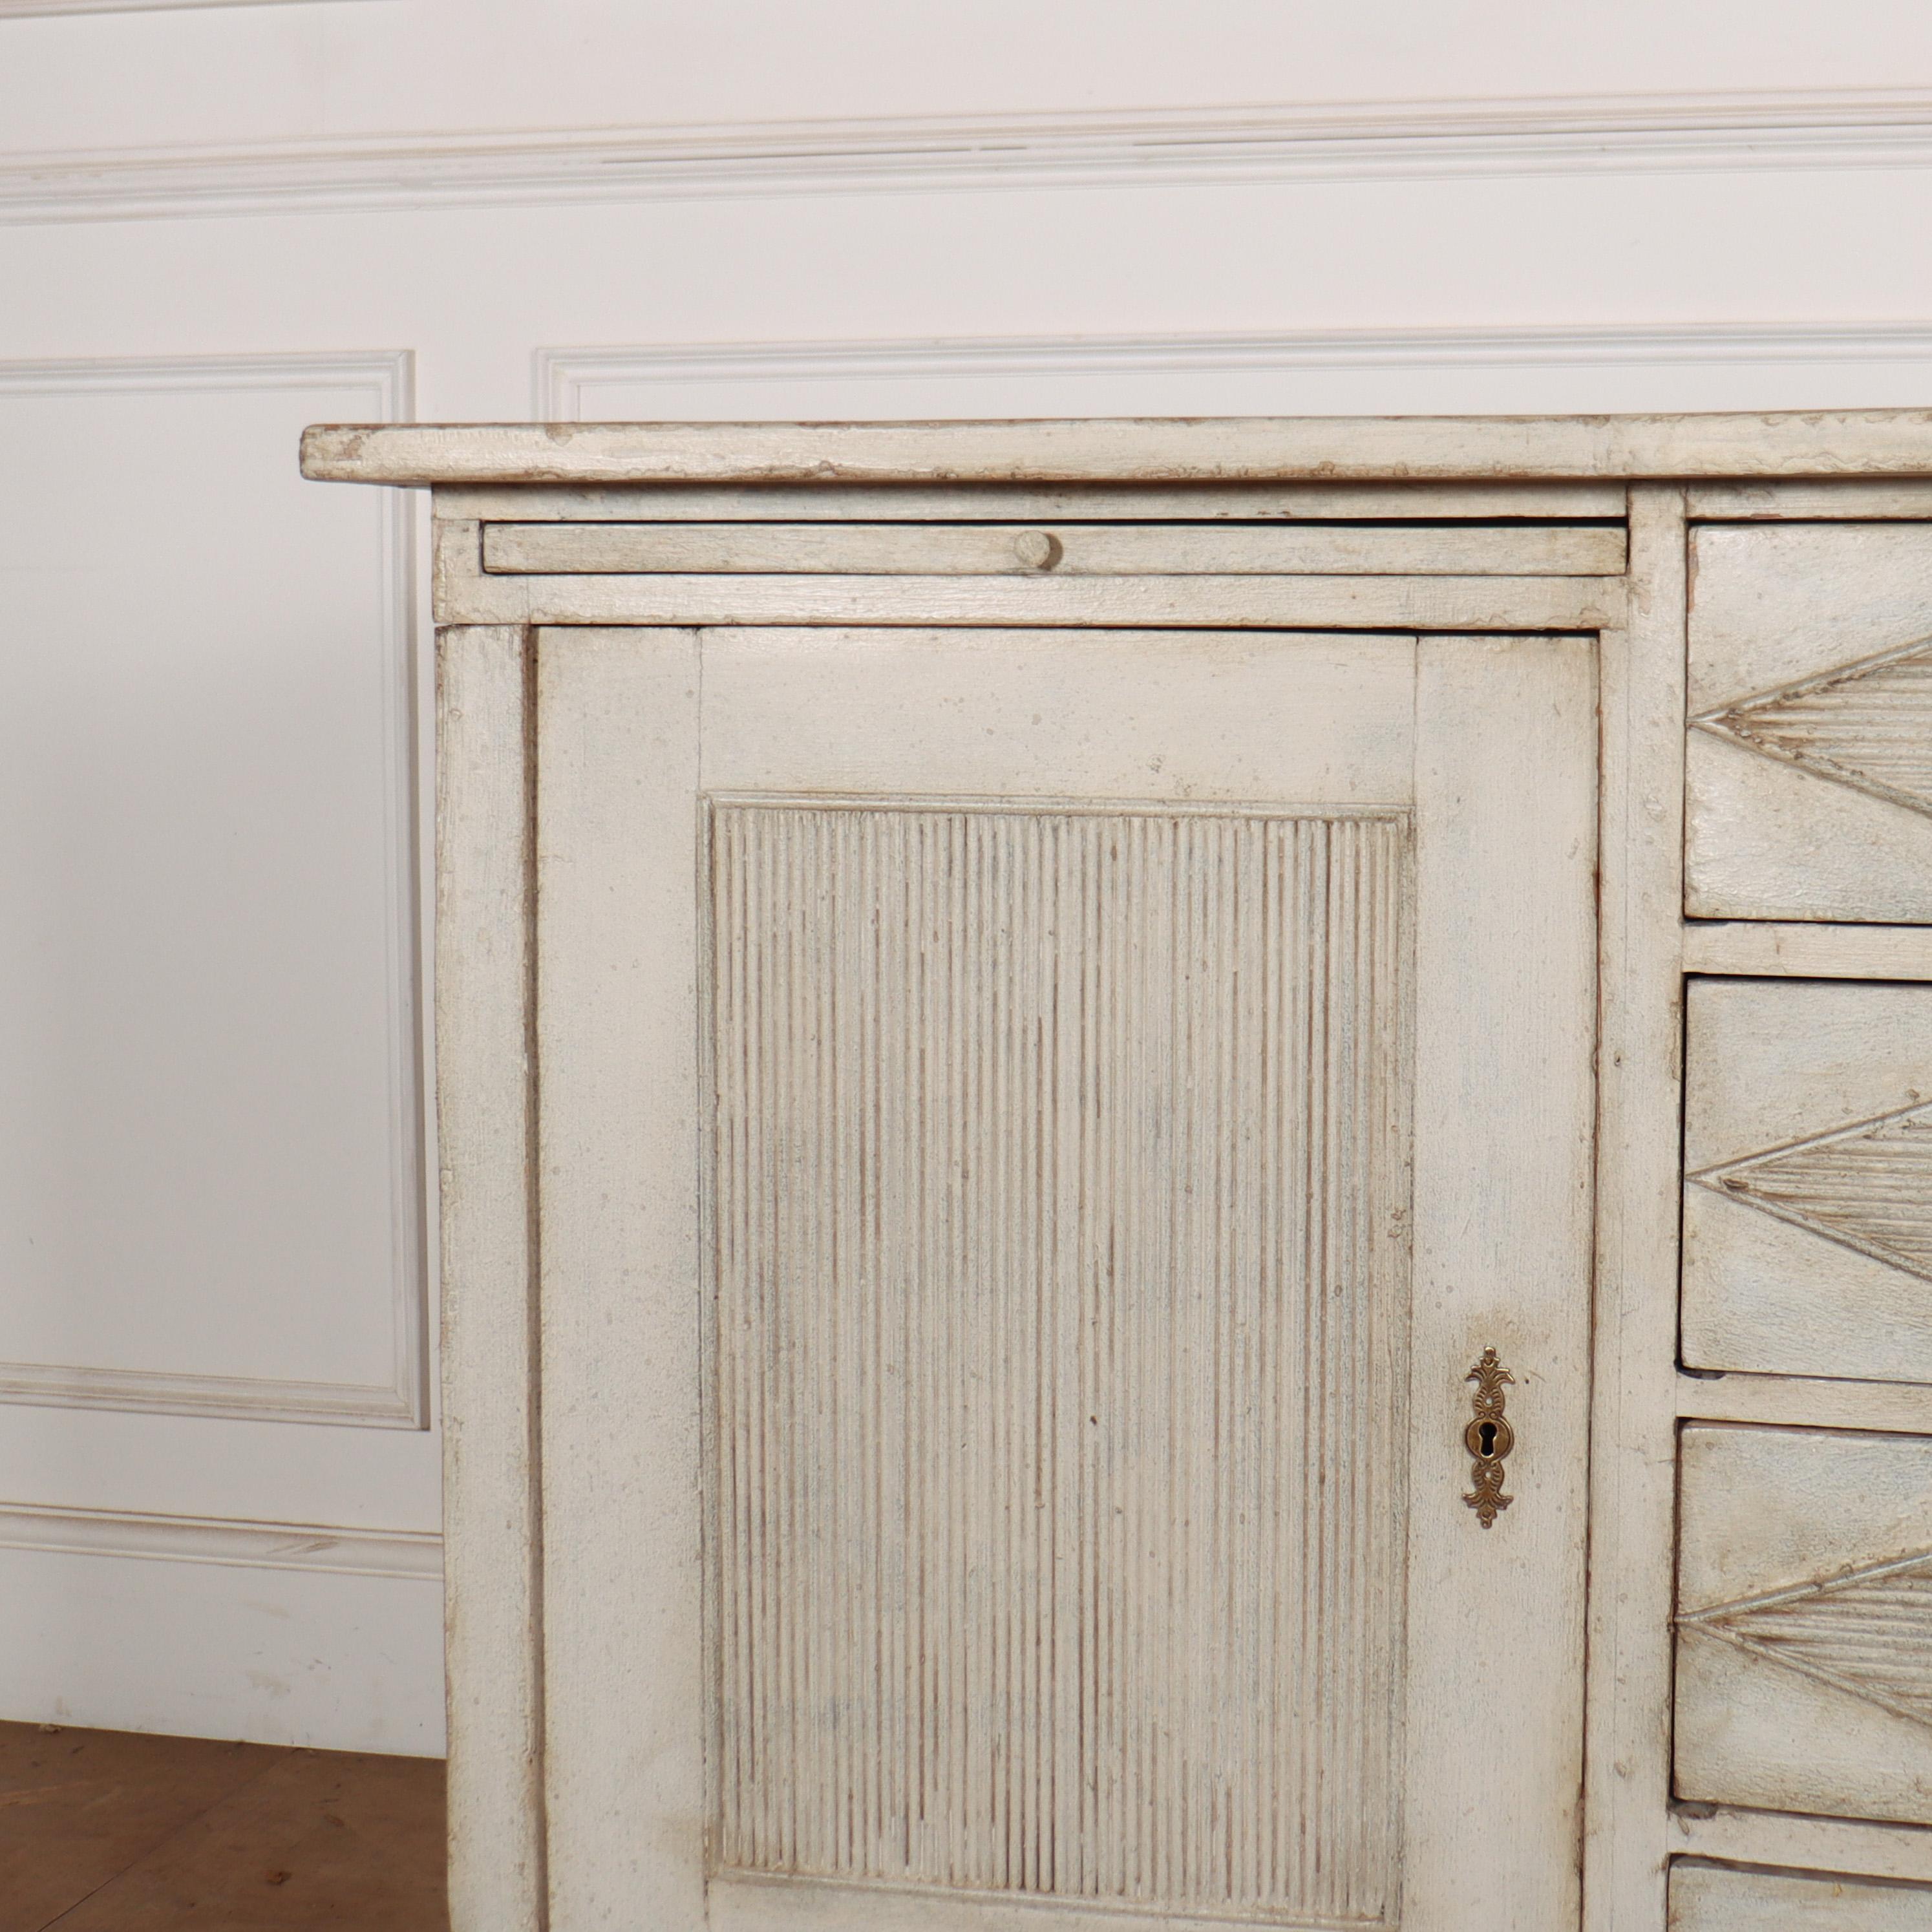 19th C Swedish painted pine enfilade with reeded decoration. 1840.

Reference: 8123

Dimensions
67 inches (170 cms) Wide
26.5 inches (67 cms) Deep
37.5 inches (95 cms) High